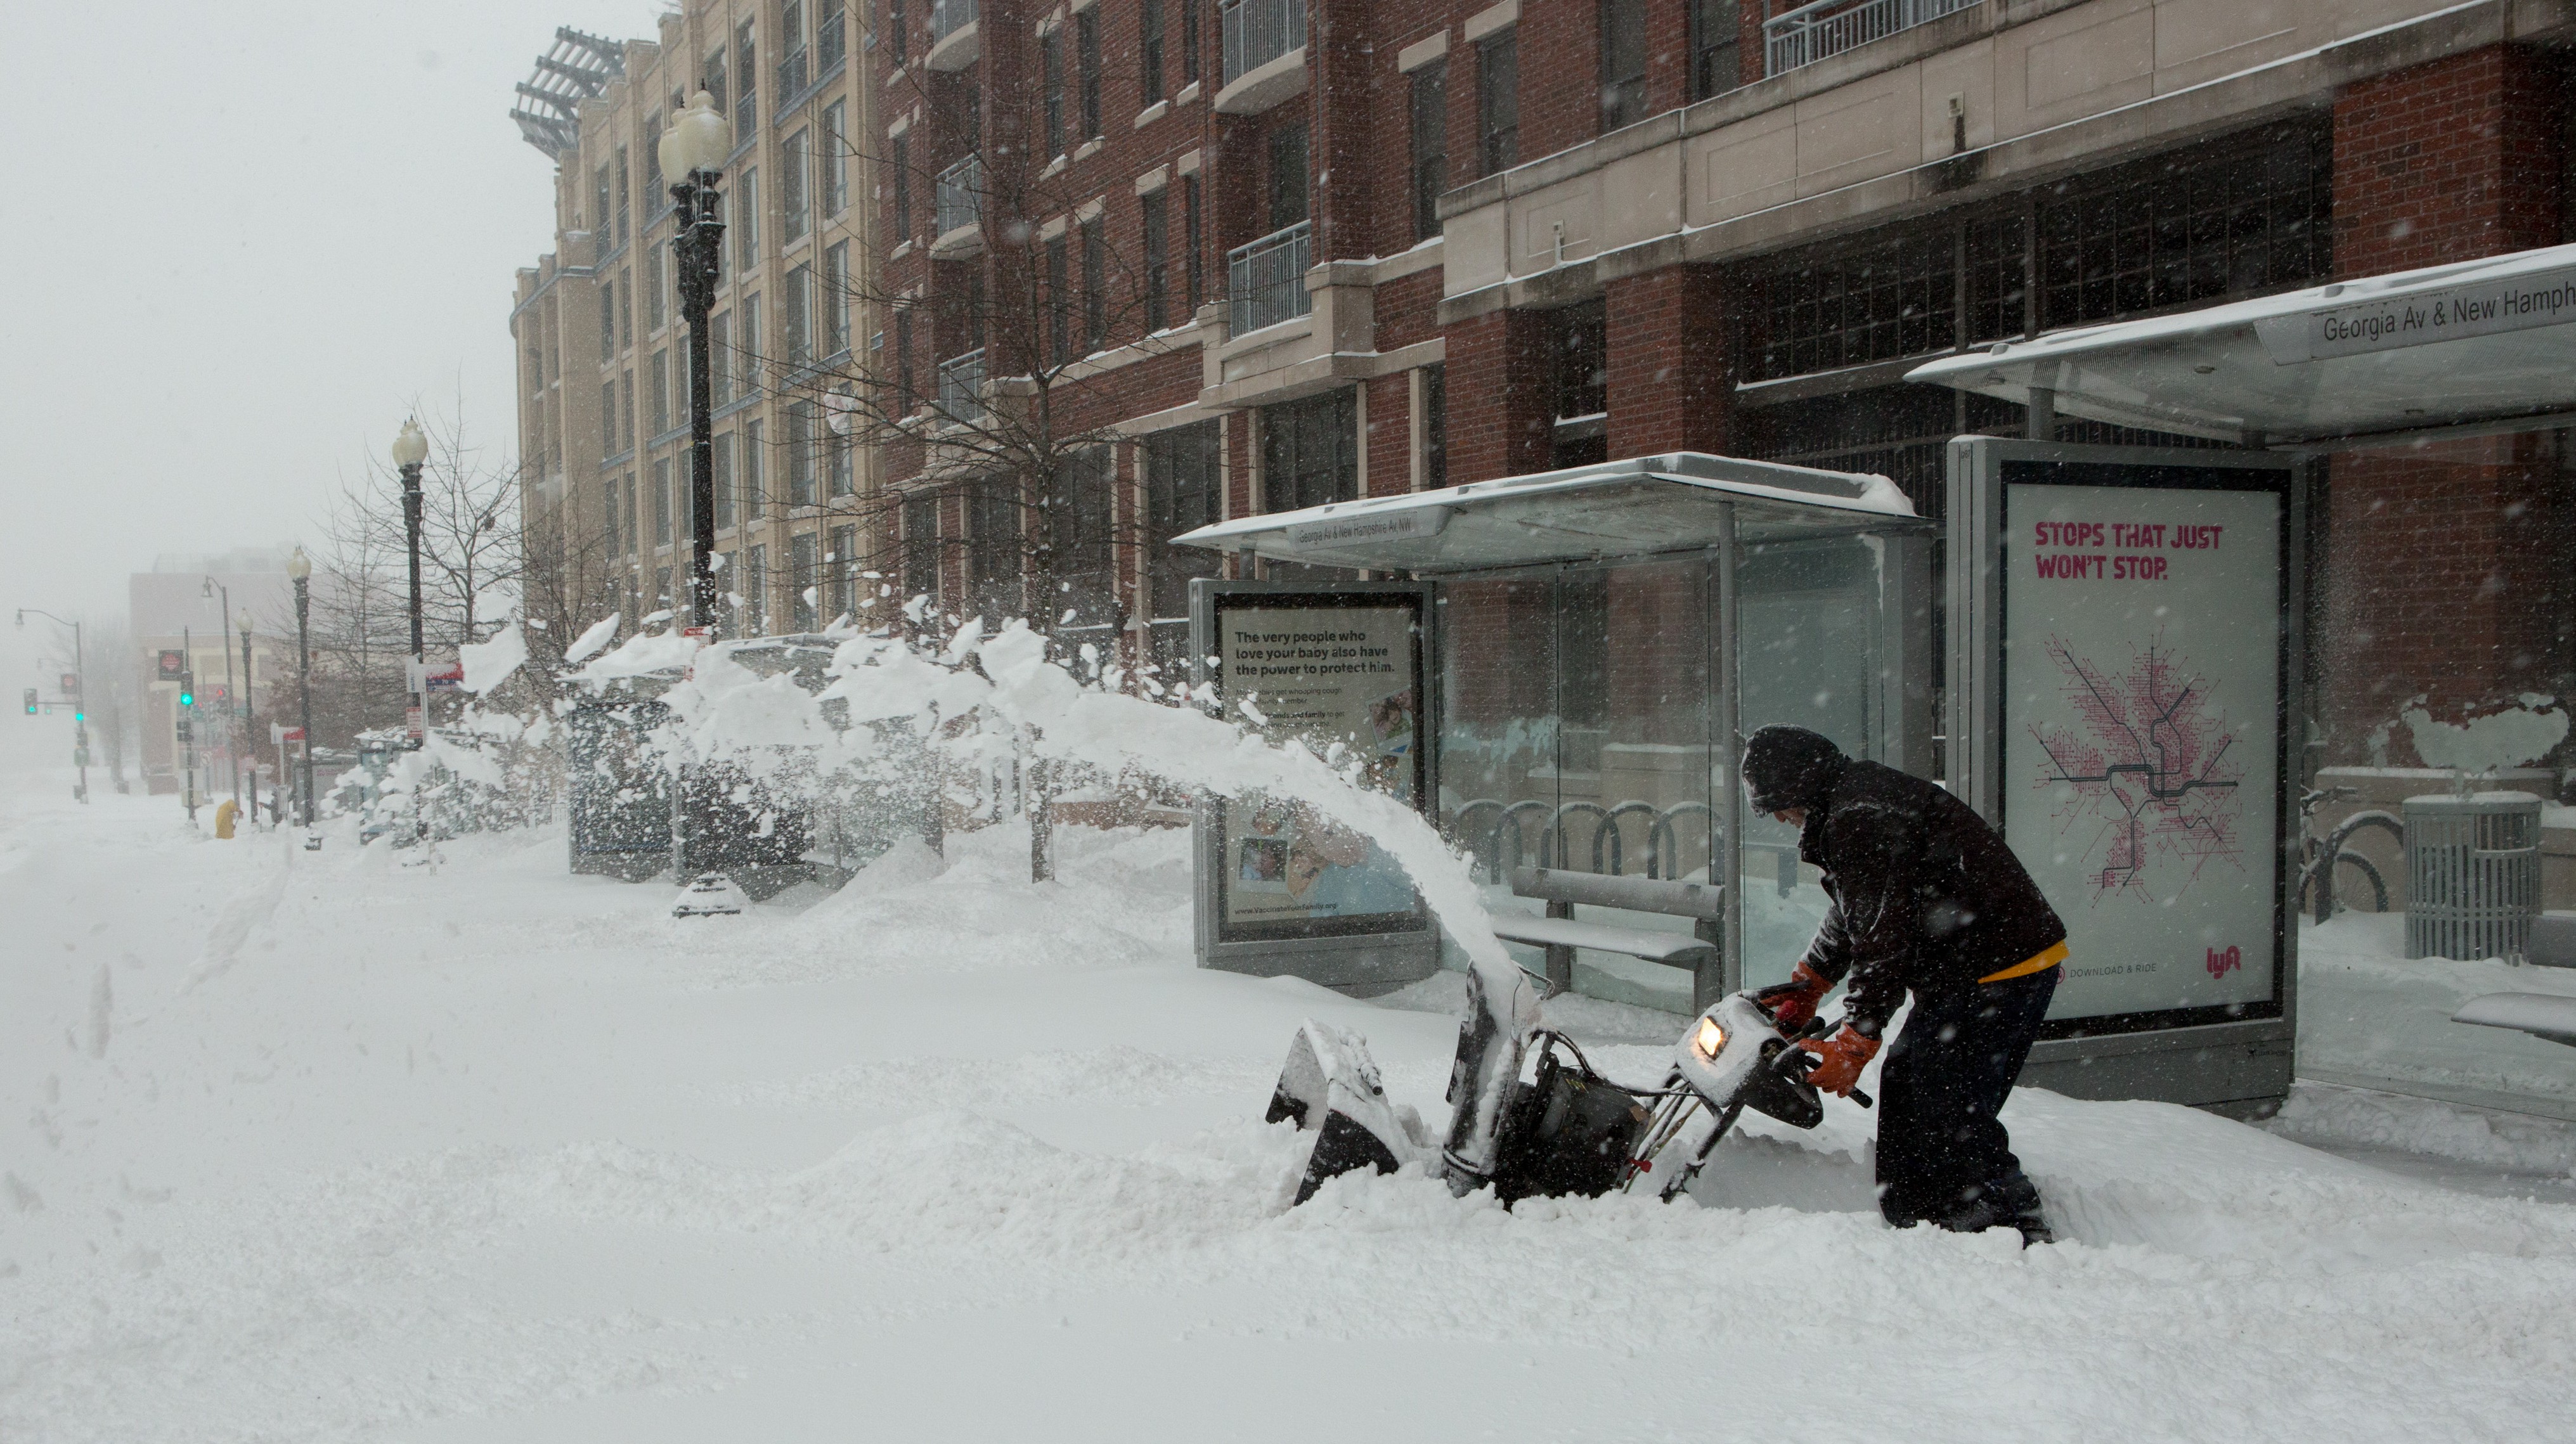 DC Snow Totals for Winter Storm Jonas Blizzard of 2016